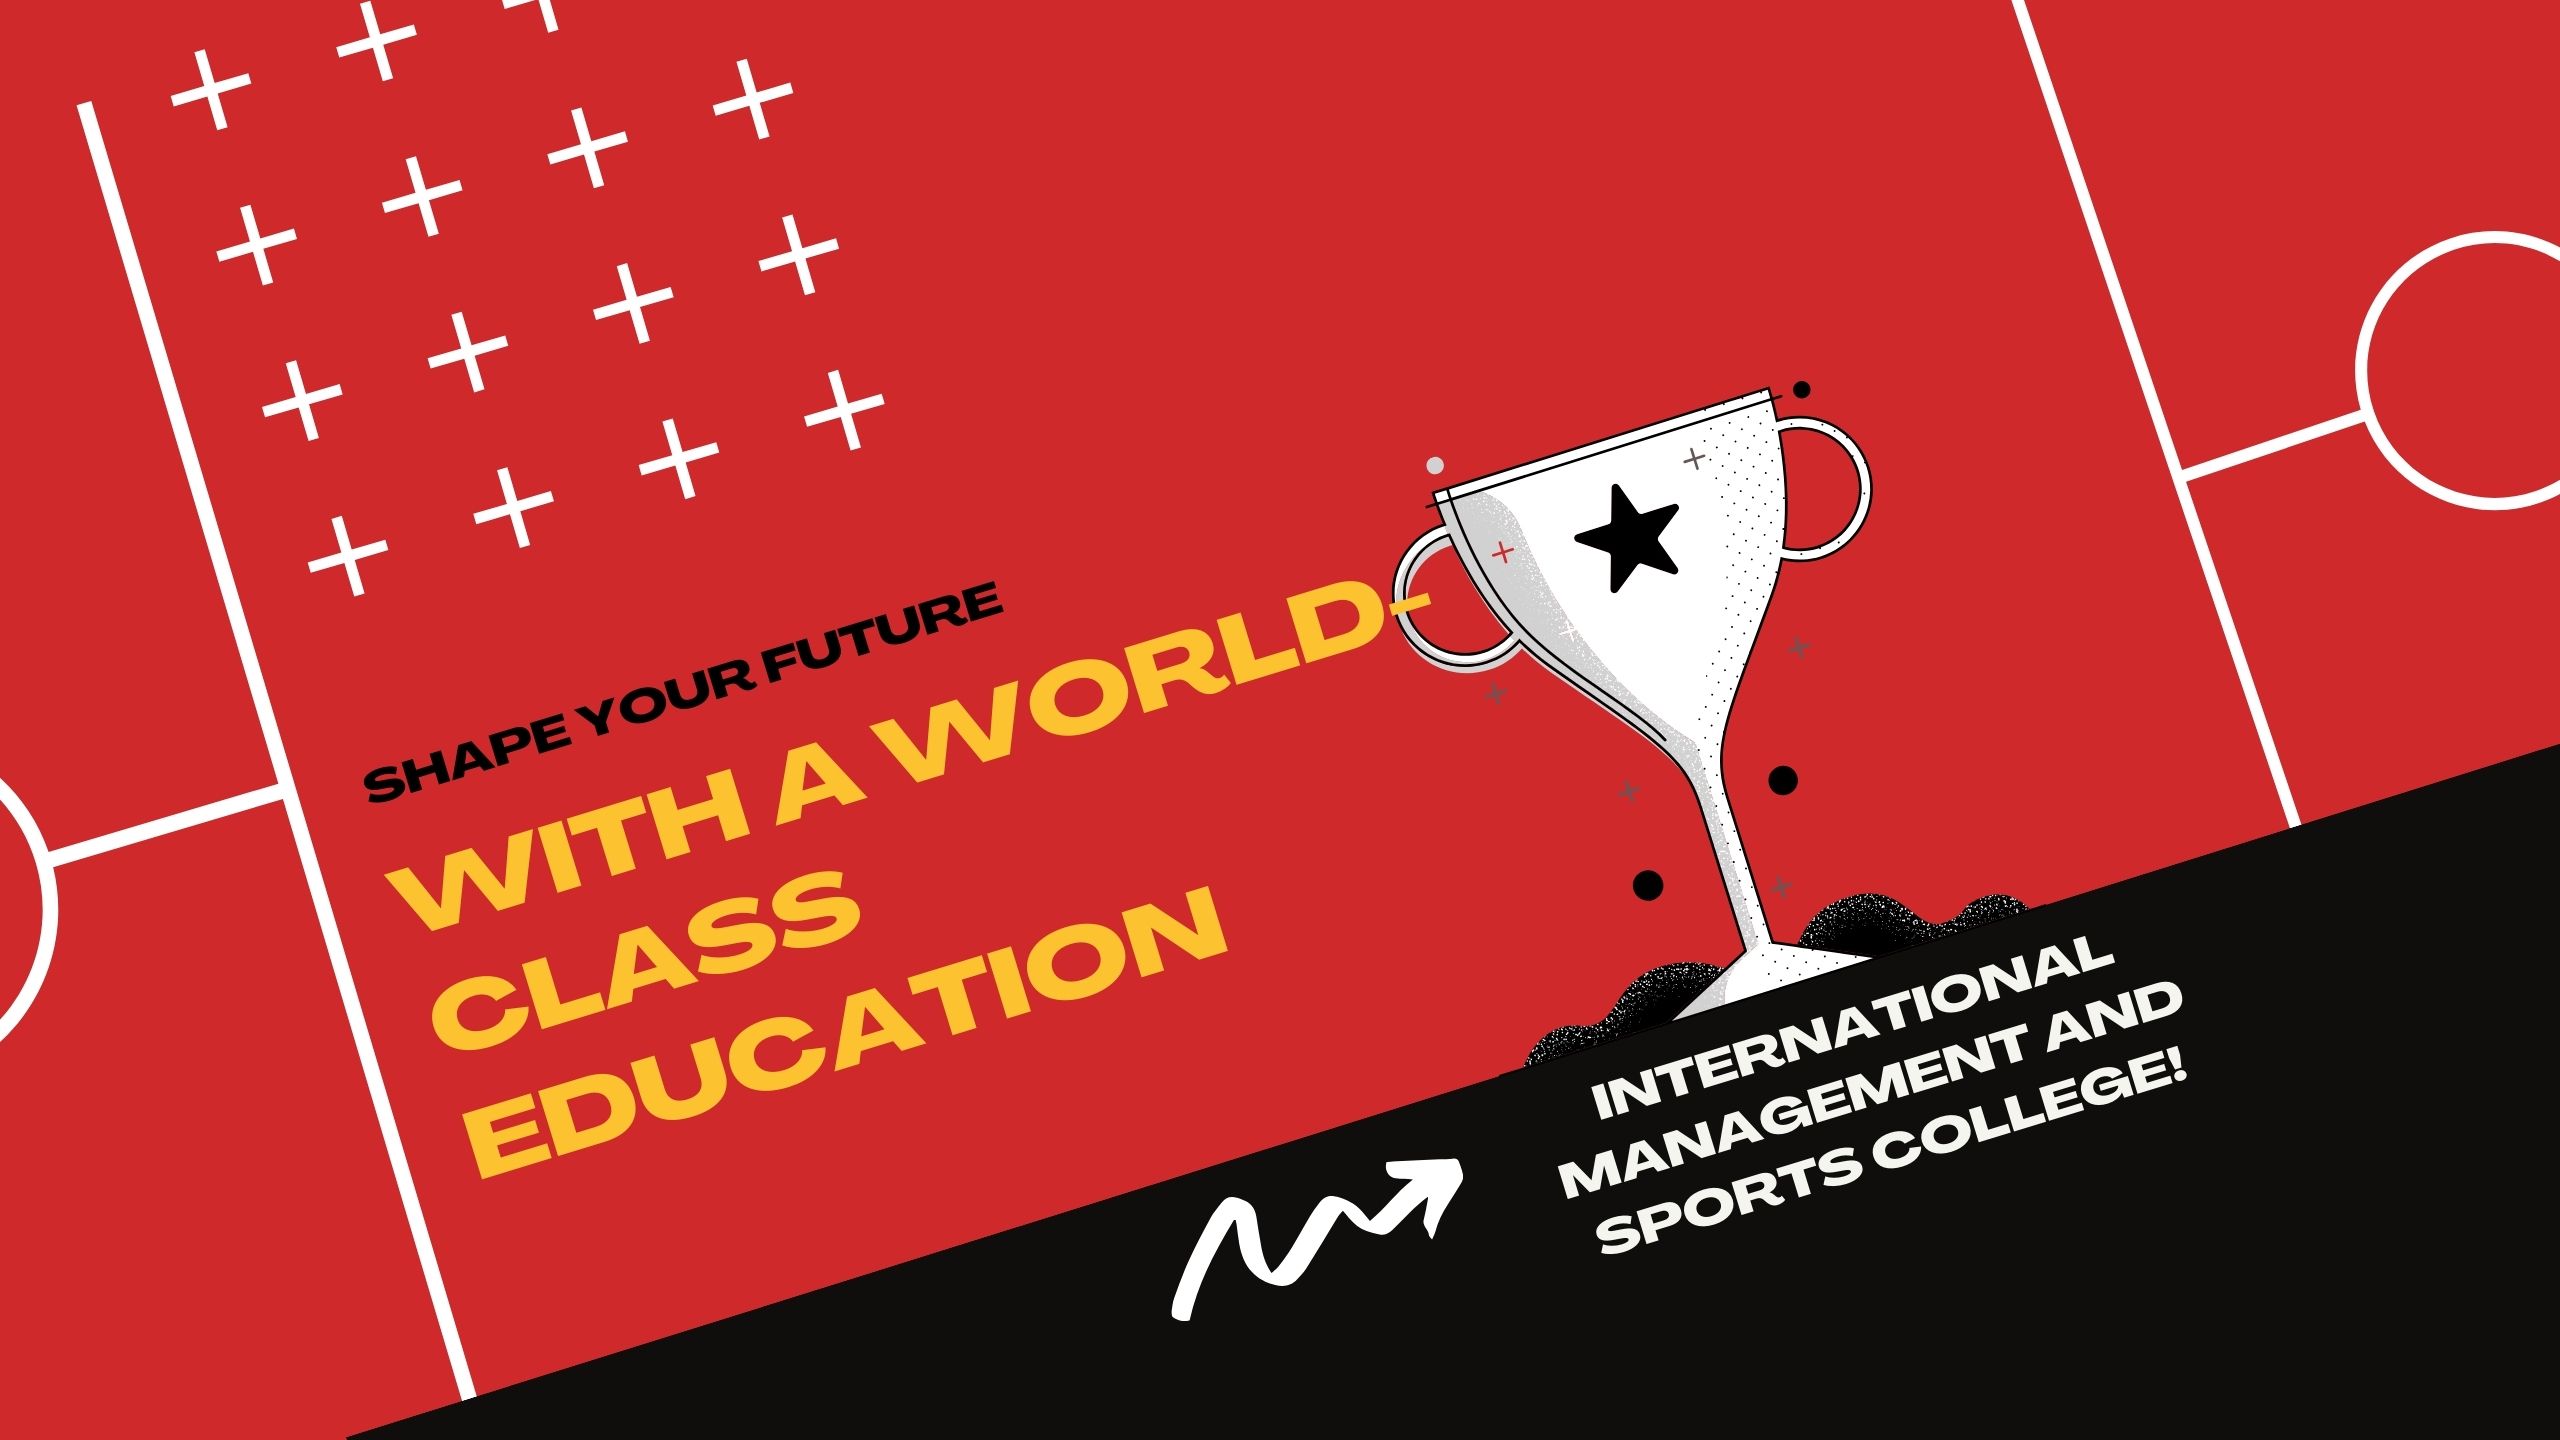 International Management and sports college banner1